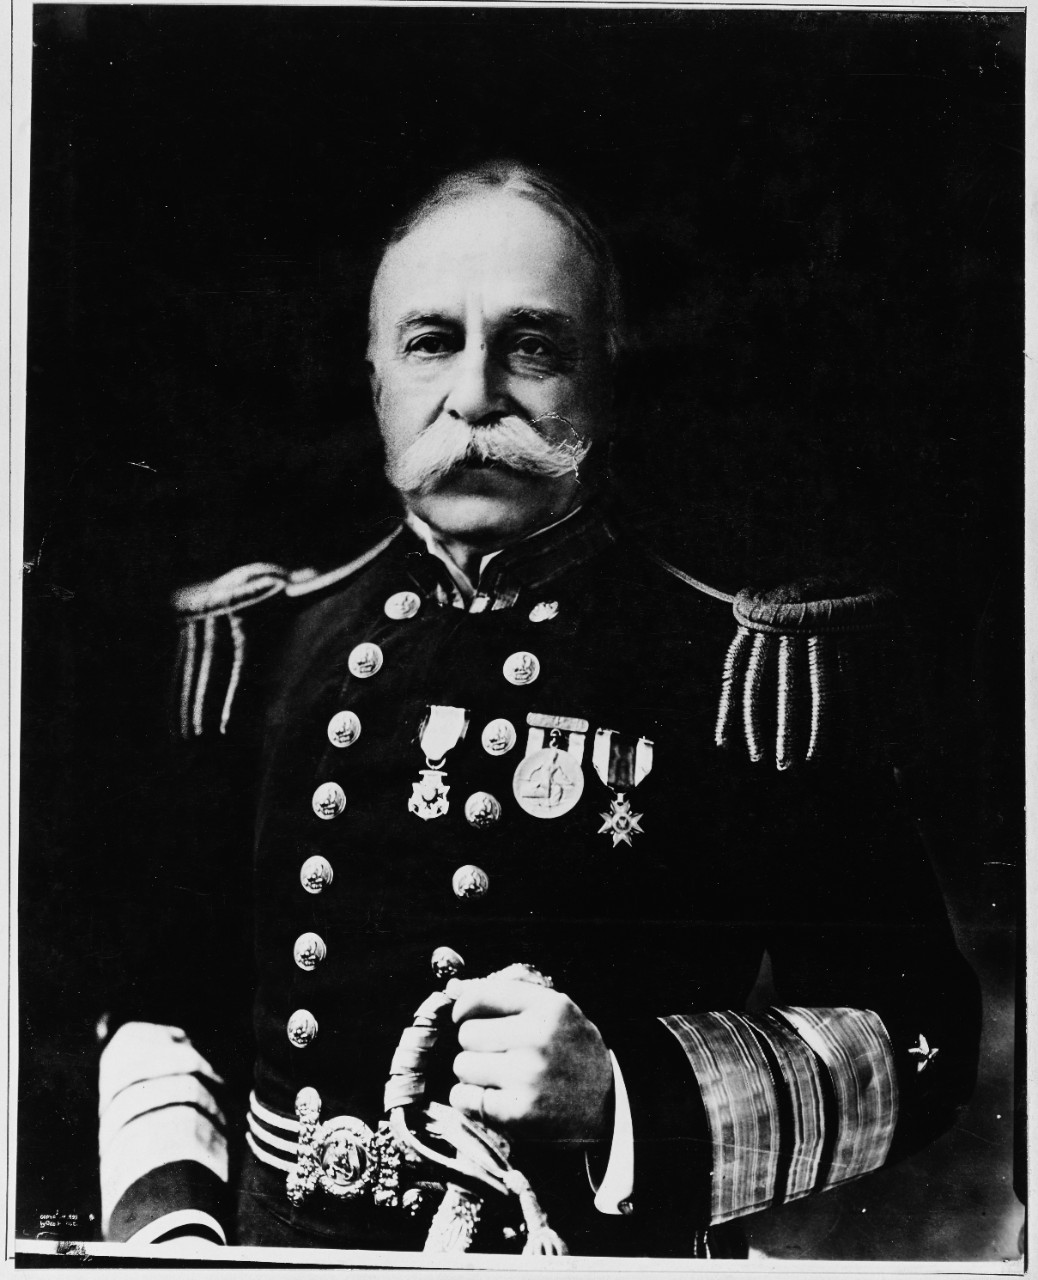 George Dewey as an Admiral in the United States Navy, 1899.